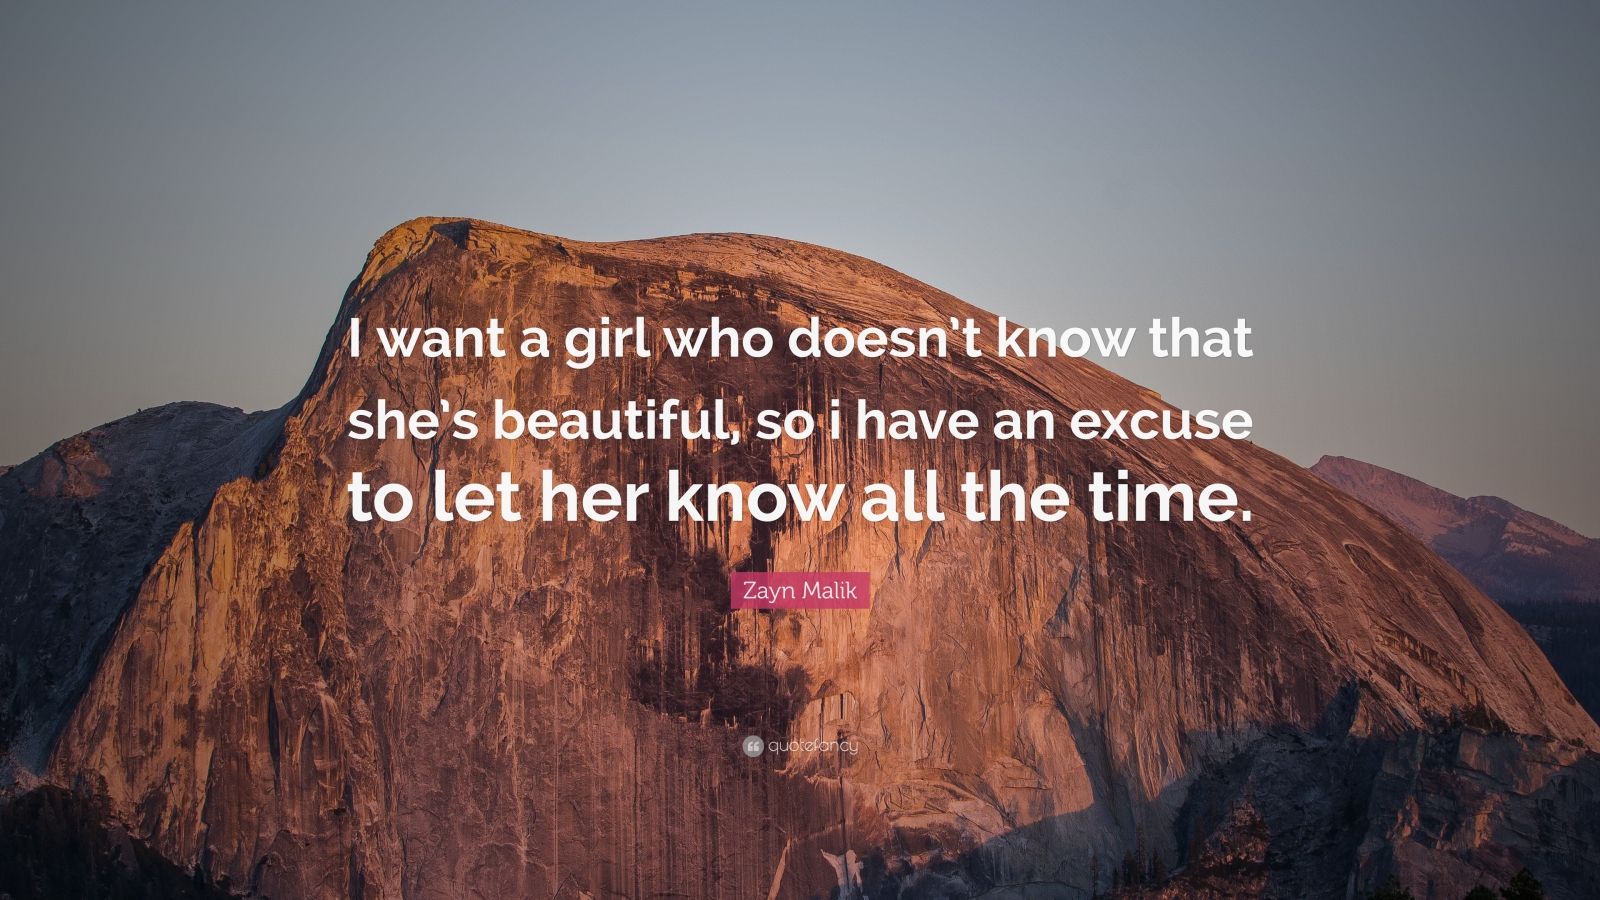 Zayn Malik Quote: “I want a girl who doesn’t know that she’s beautiful ...